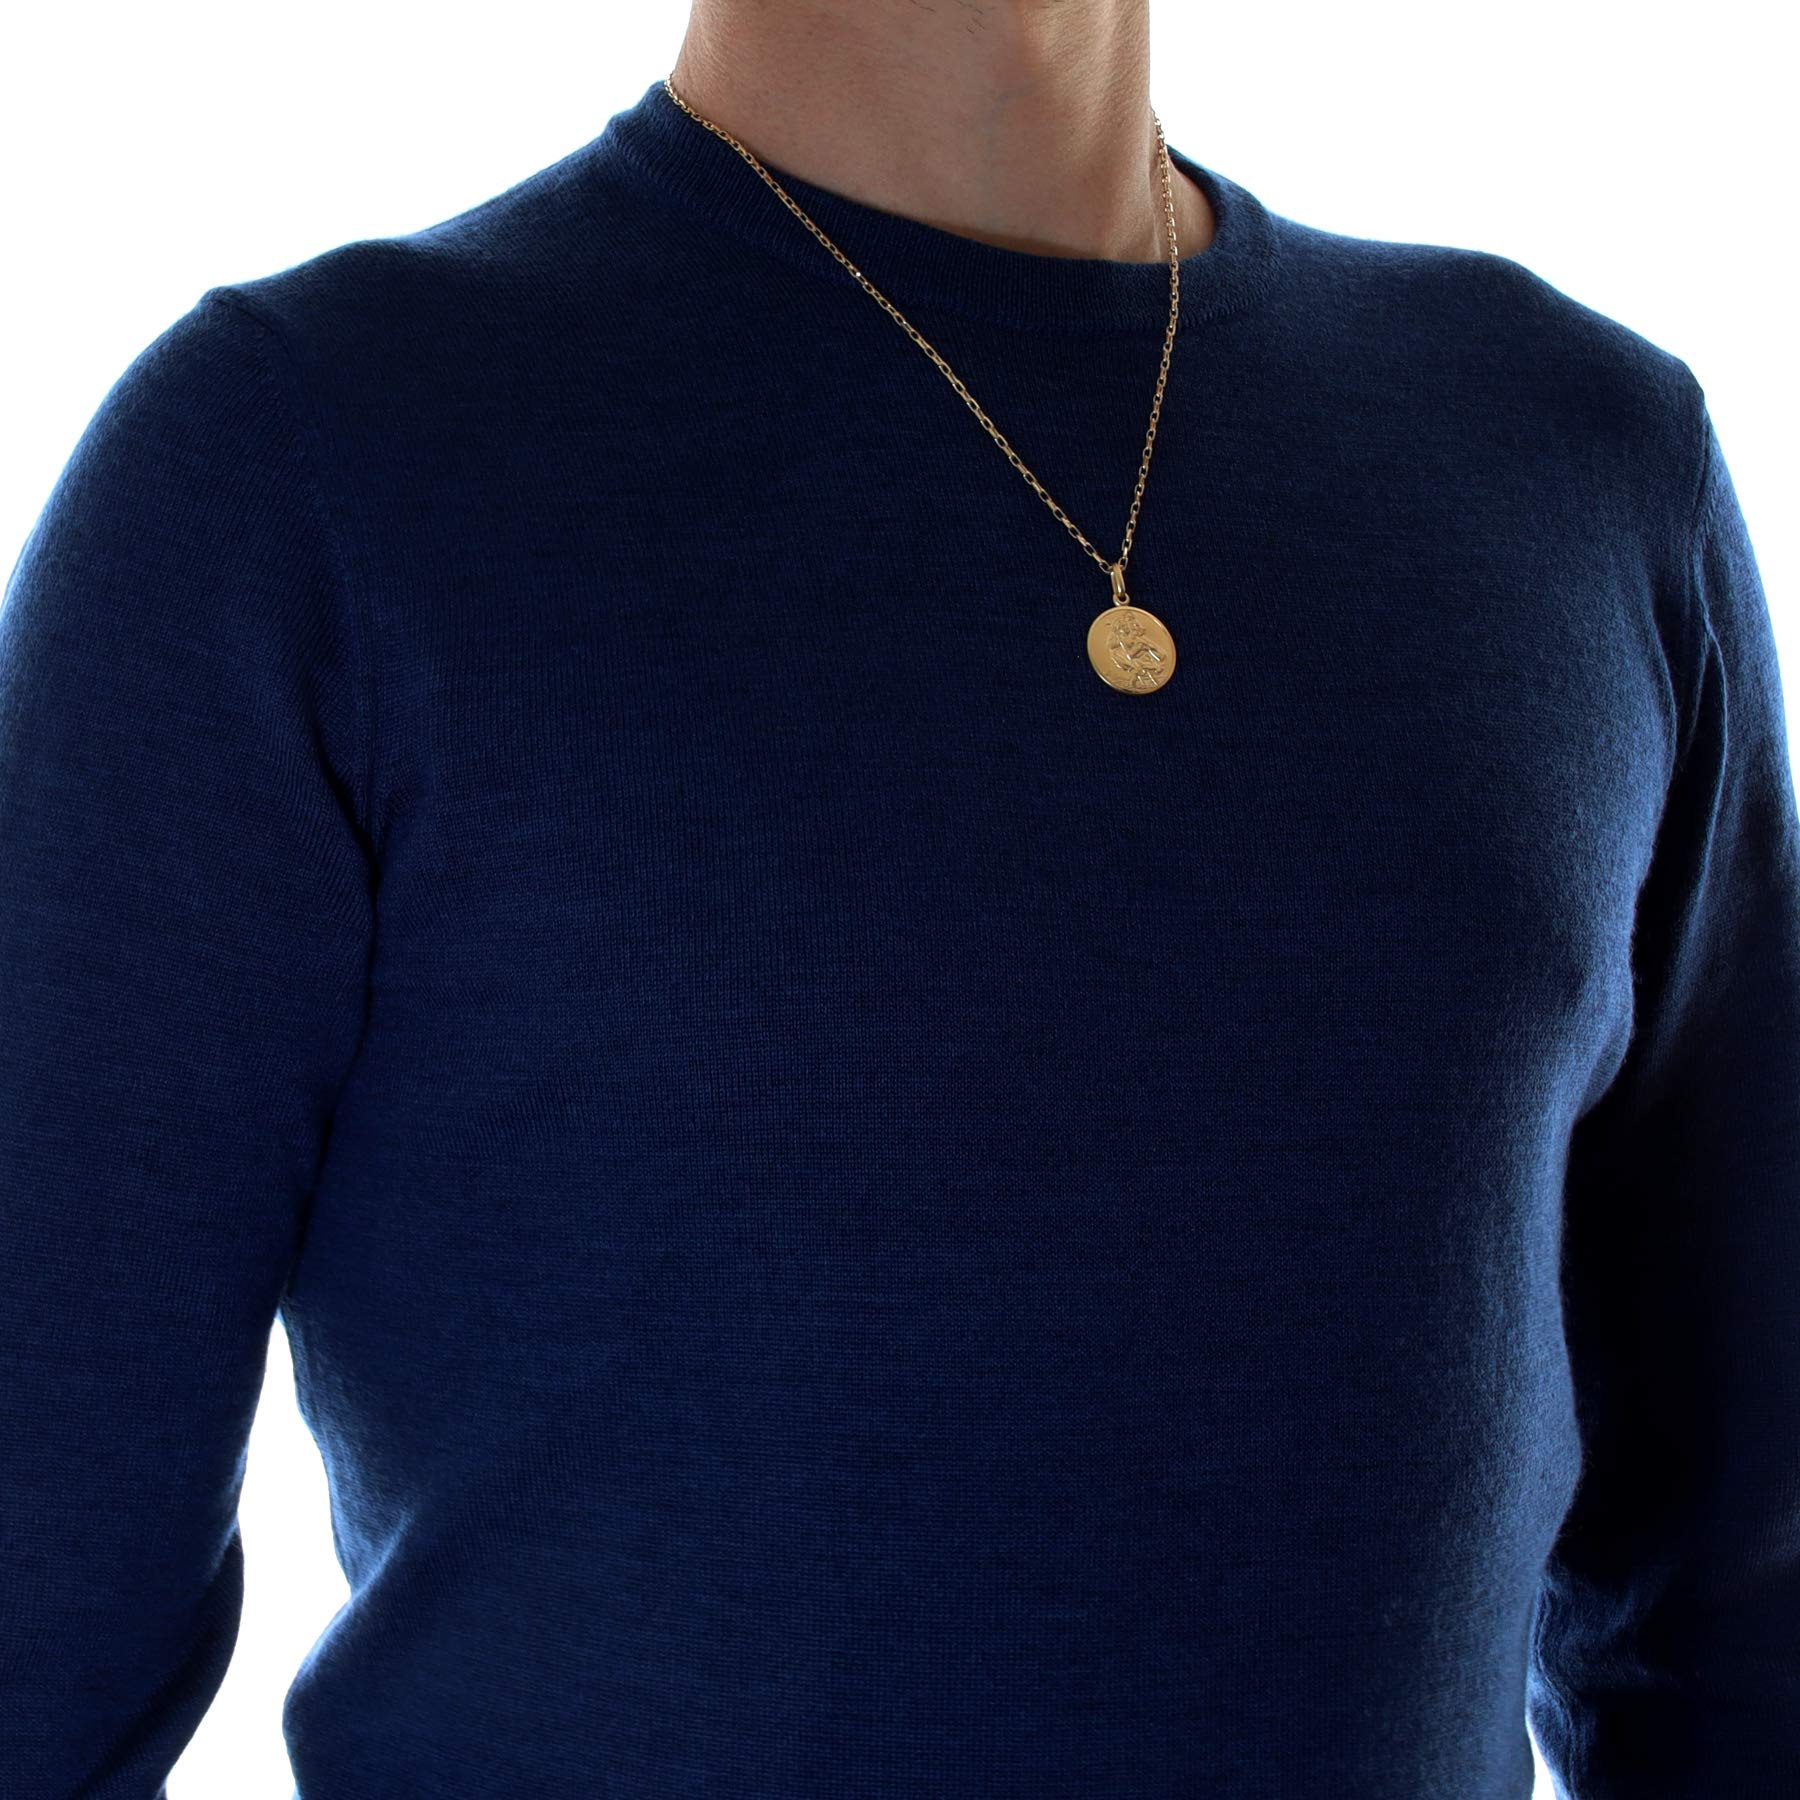 Buy Saint Christopher Necklace 5 Way Set Men's Necklace Gold St Christopher  Medal With Round Box and Rope Chain for a Layering Effect. Online in India  - Etsy